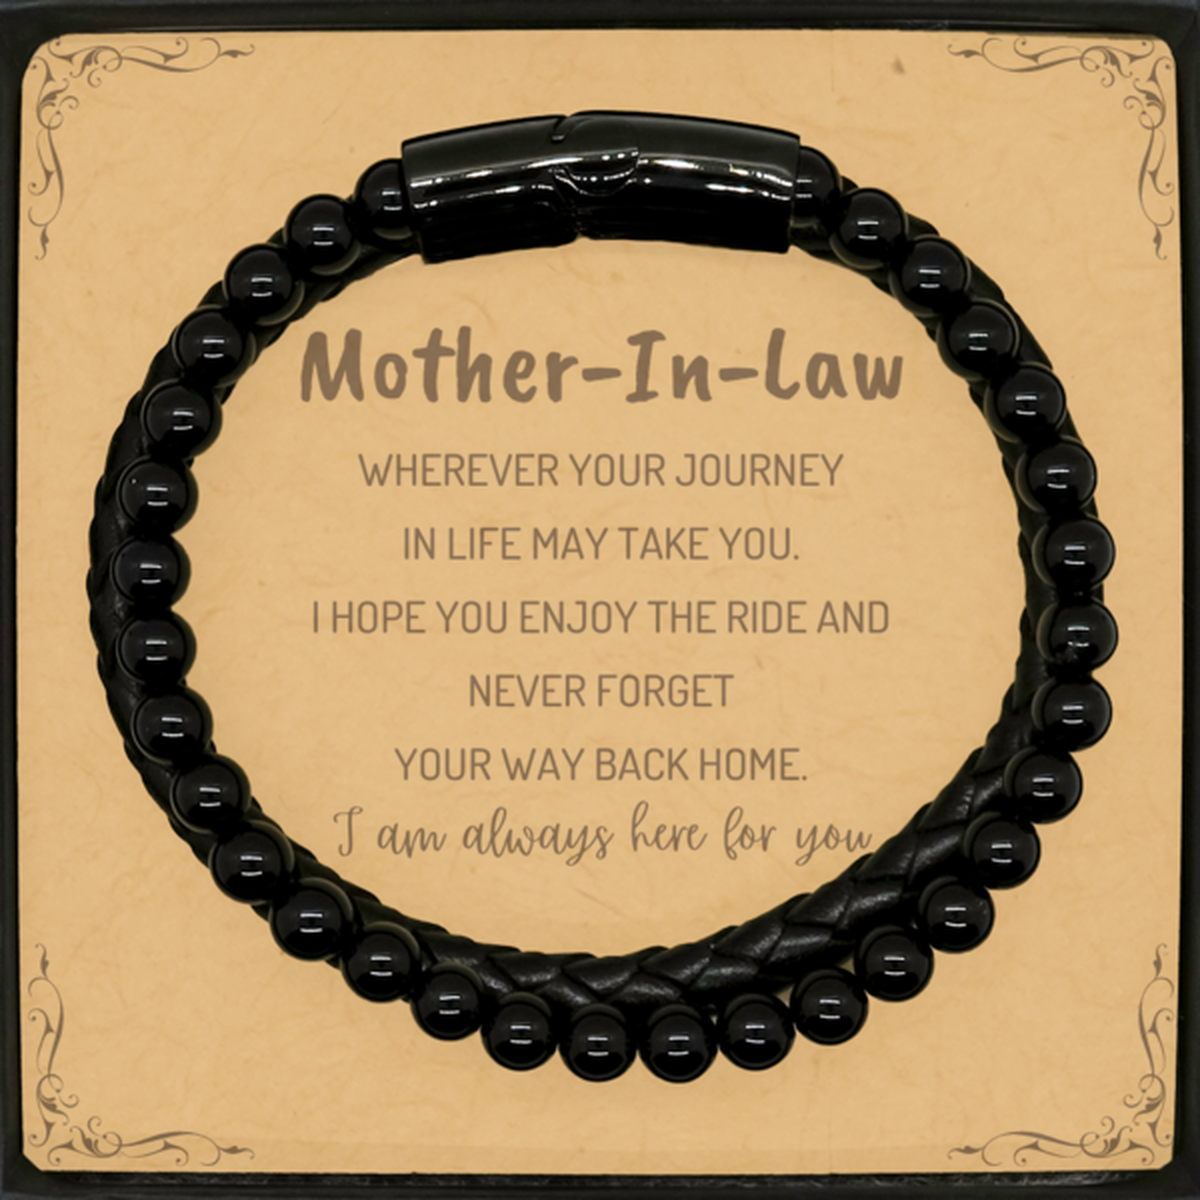 Mother-In-Law wherever your journey in life may take you, I am always here for you Mother-In-Law Stone Leather Bracelets, Awesome Christmas Gifts For Mother-In-Law Message Card, Mother-In-Law Birthday Gifts for Men Women Family Loved One